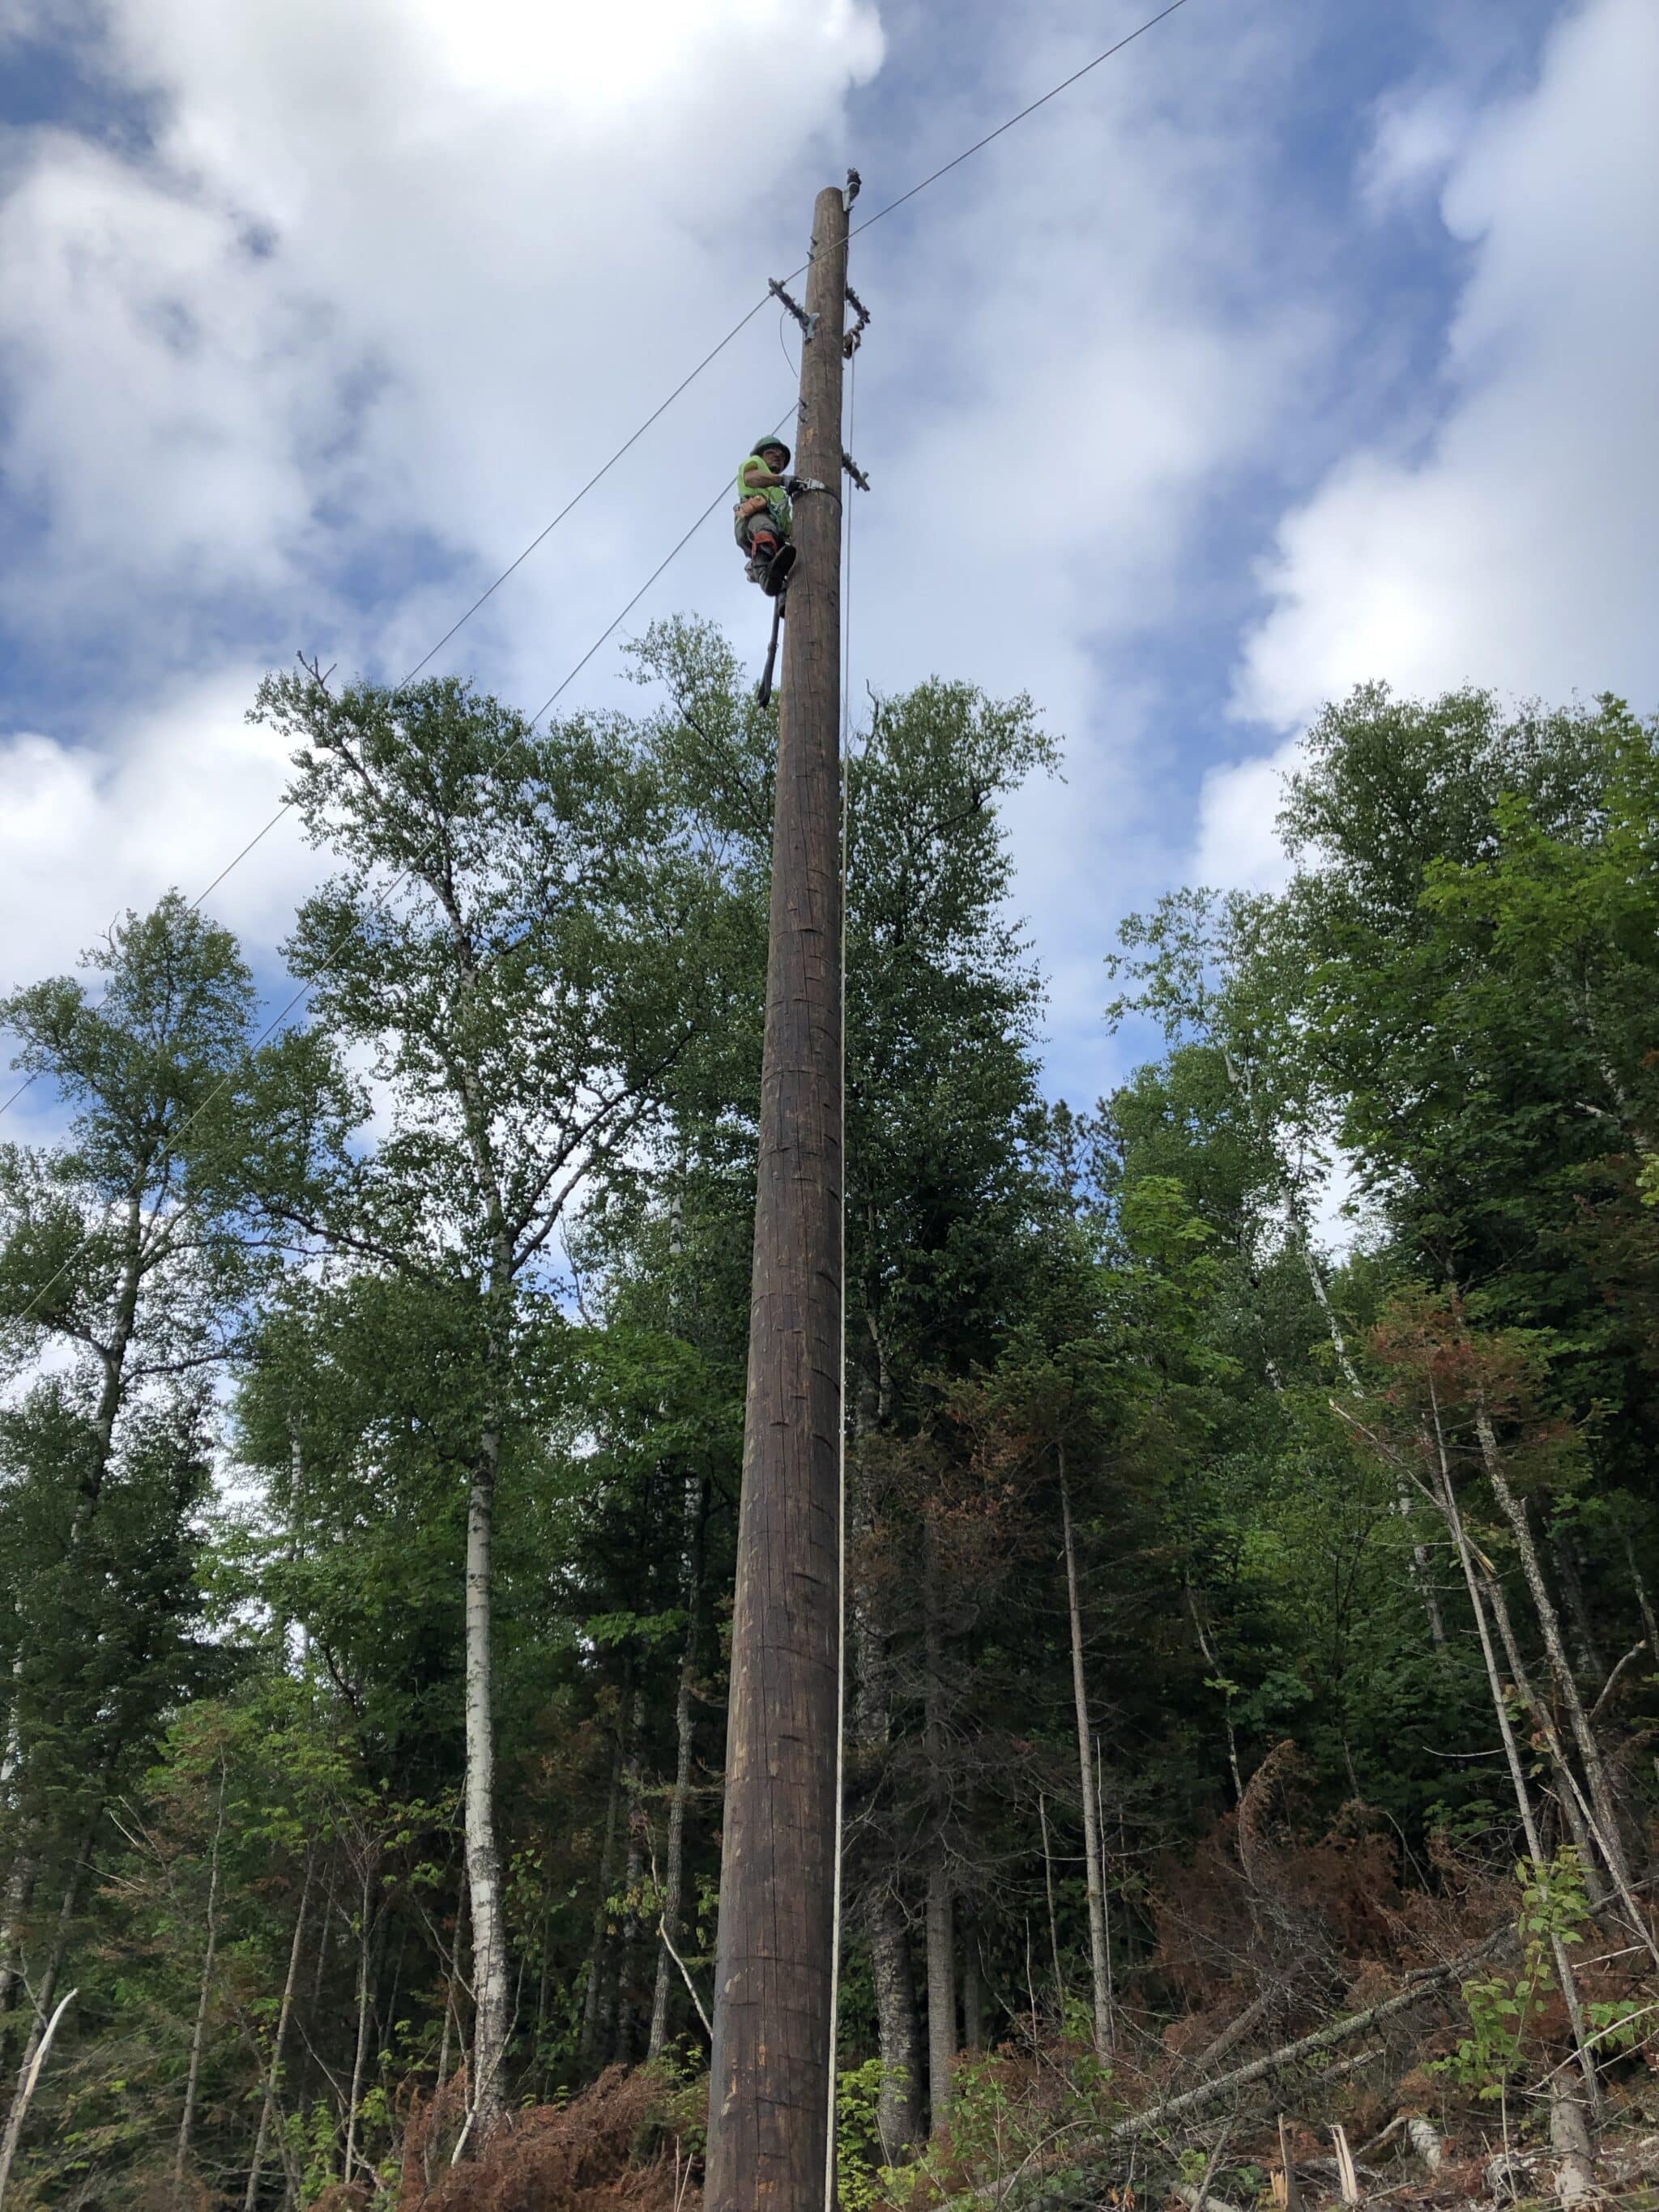 Person working up high on an electrical pole with trees in the background